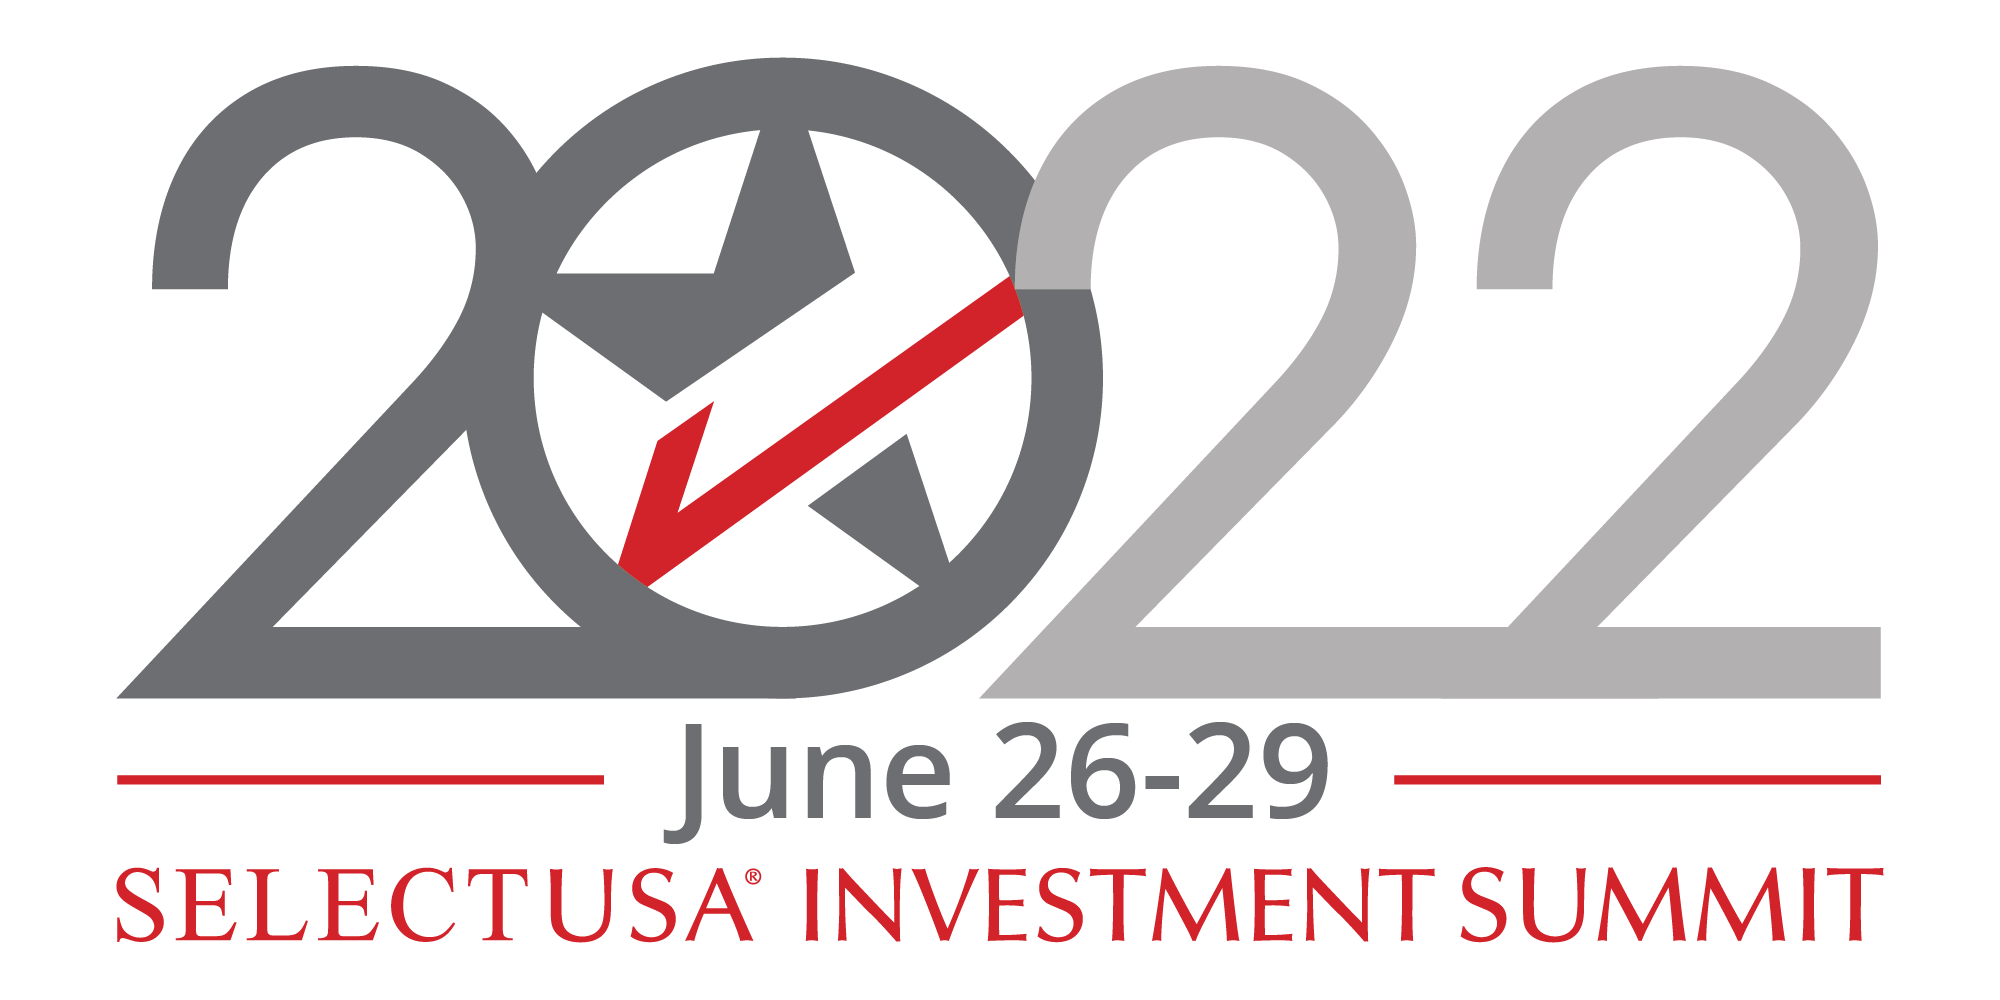 SelectUSA Investment Summit in National Harbor, MD June 26 29, 2022